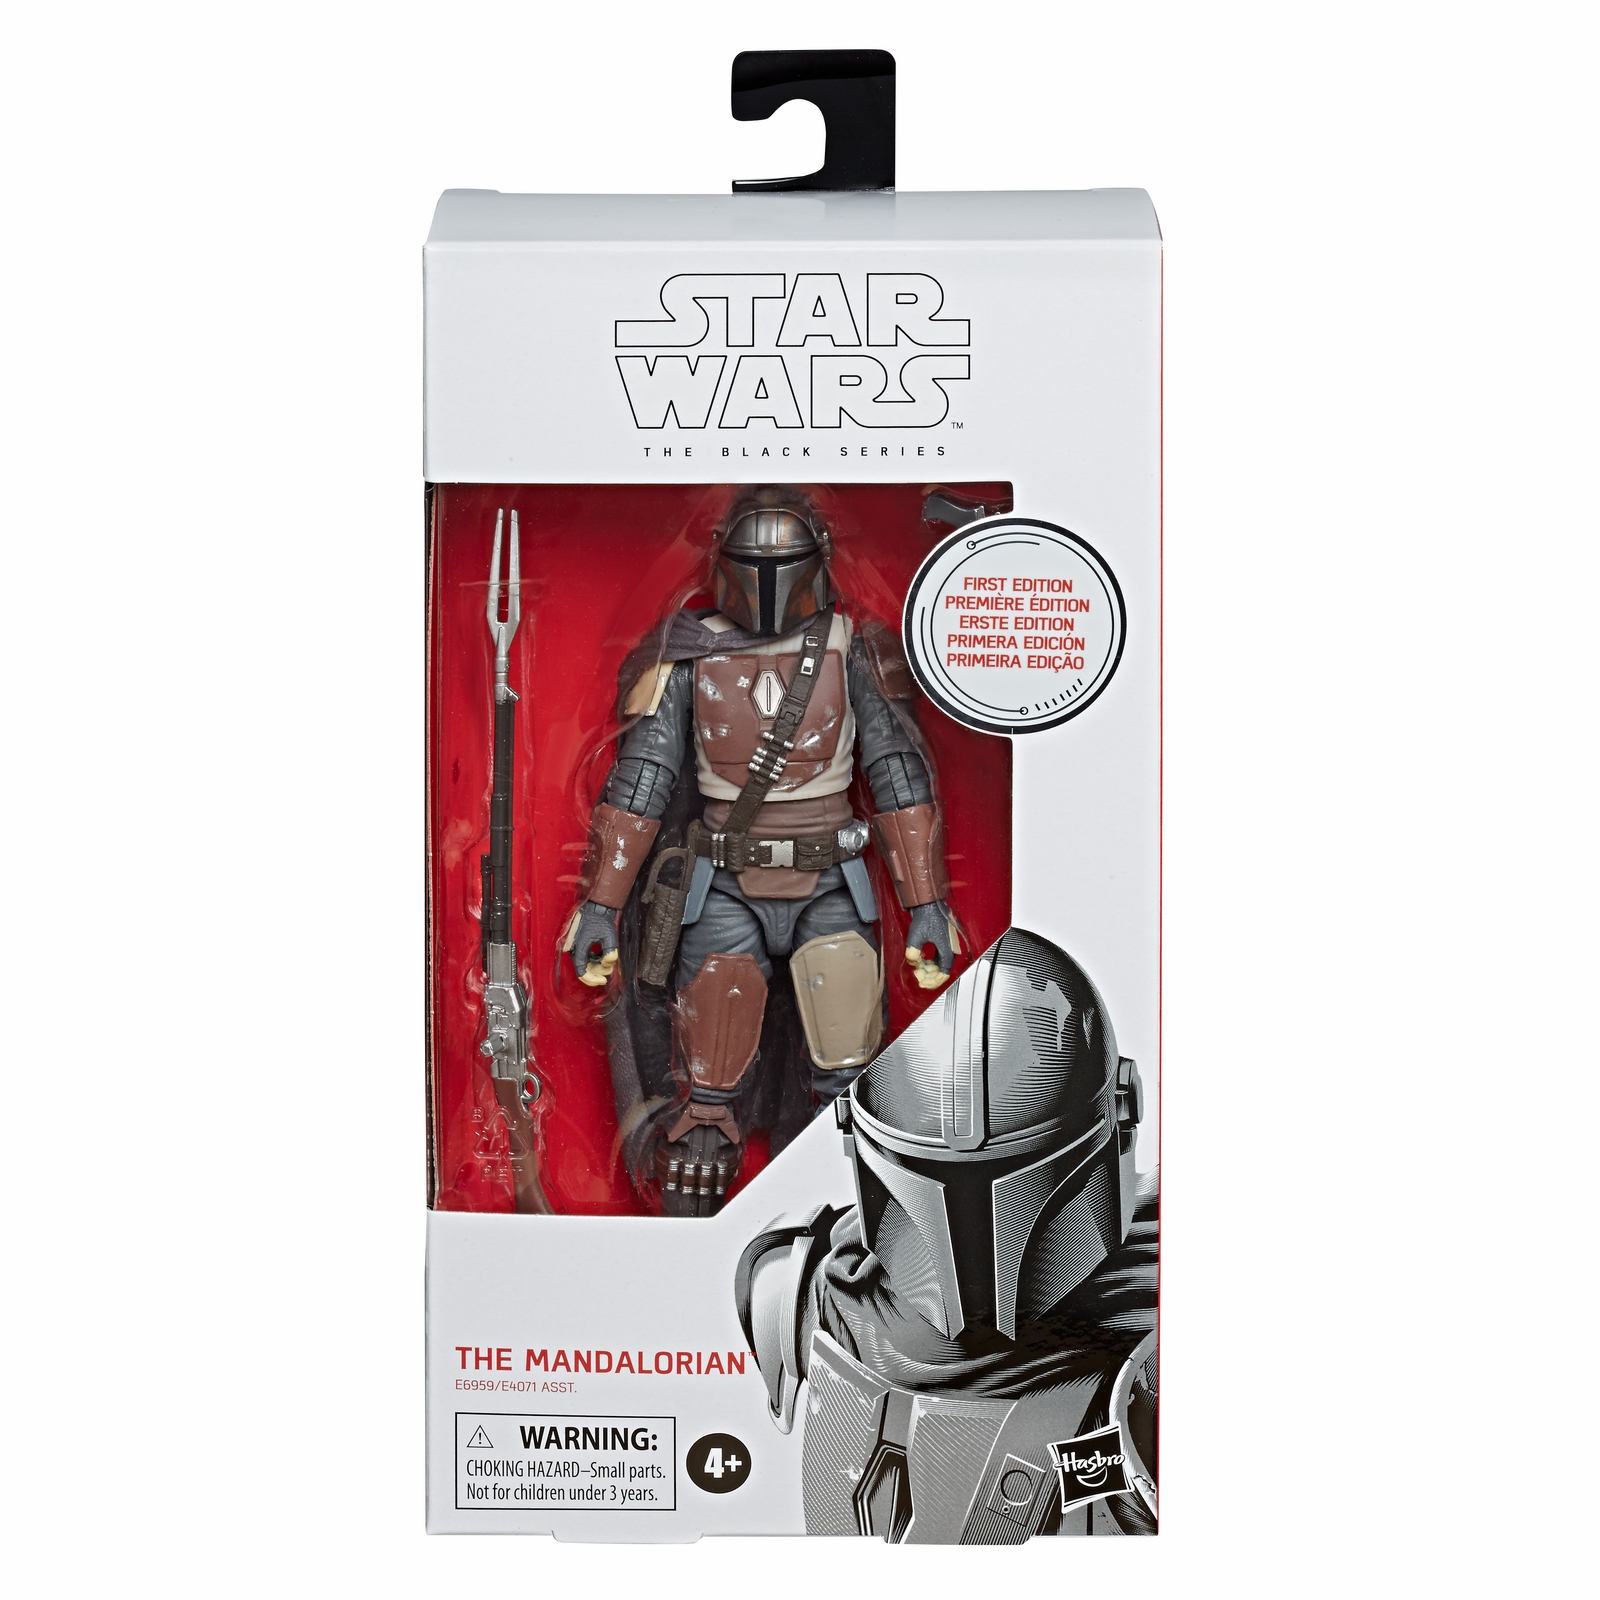 STAR WARS THE BLACK SERIES 6-INCH THE MANDALORIAN Figure - First Edition pckging.jpg